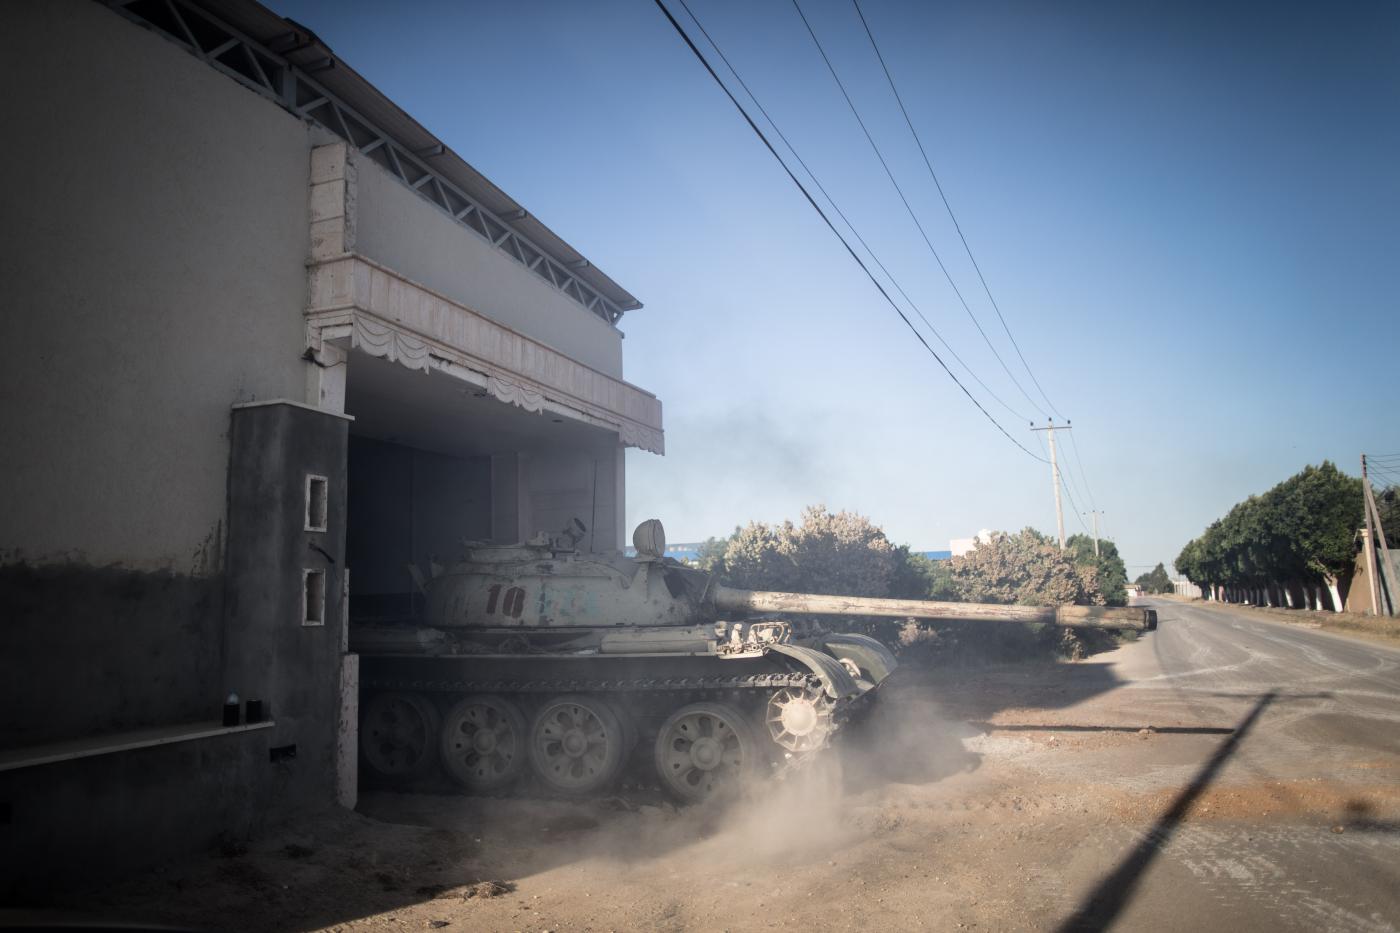 TRIPOLI, May 16, 2019 (Xinhua) -- A tank of UN-backed government forces is seen in Al-Sawani frontline near Tripoli airport in Tripoli, Libya, on May 16, 2019. At least six civilians were reported killed and five more injured in an apparent airstrike in populated areas of the Libyan capital of Tripoli, Stephane Dujarric, spokesman for UN Secretary-General Antonio Guterres, said on Thursday. (Xinhua/Amru Salahuddien/IANS) by Amru Salahuddien.